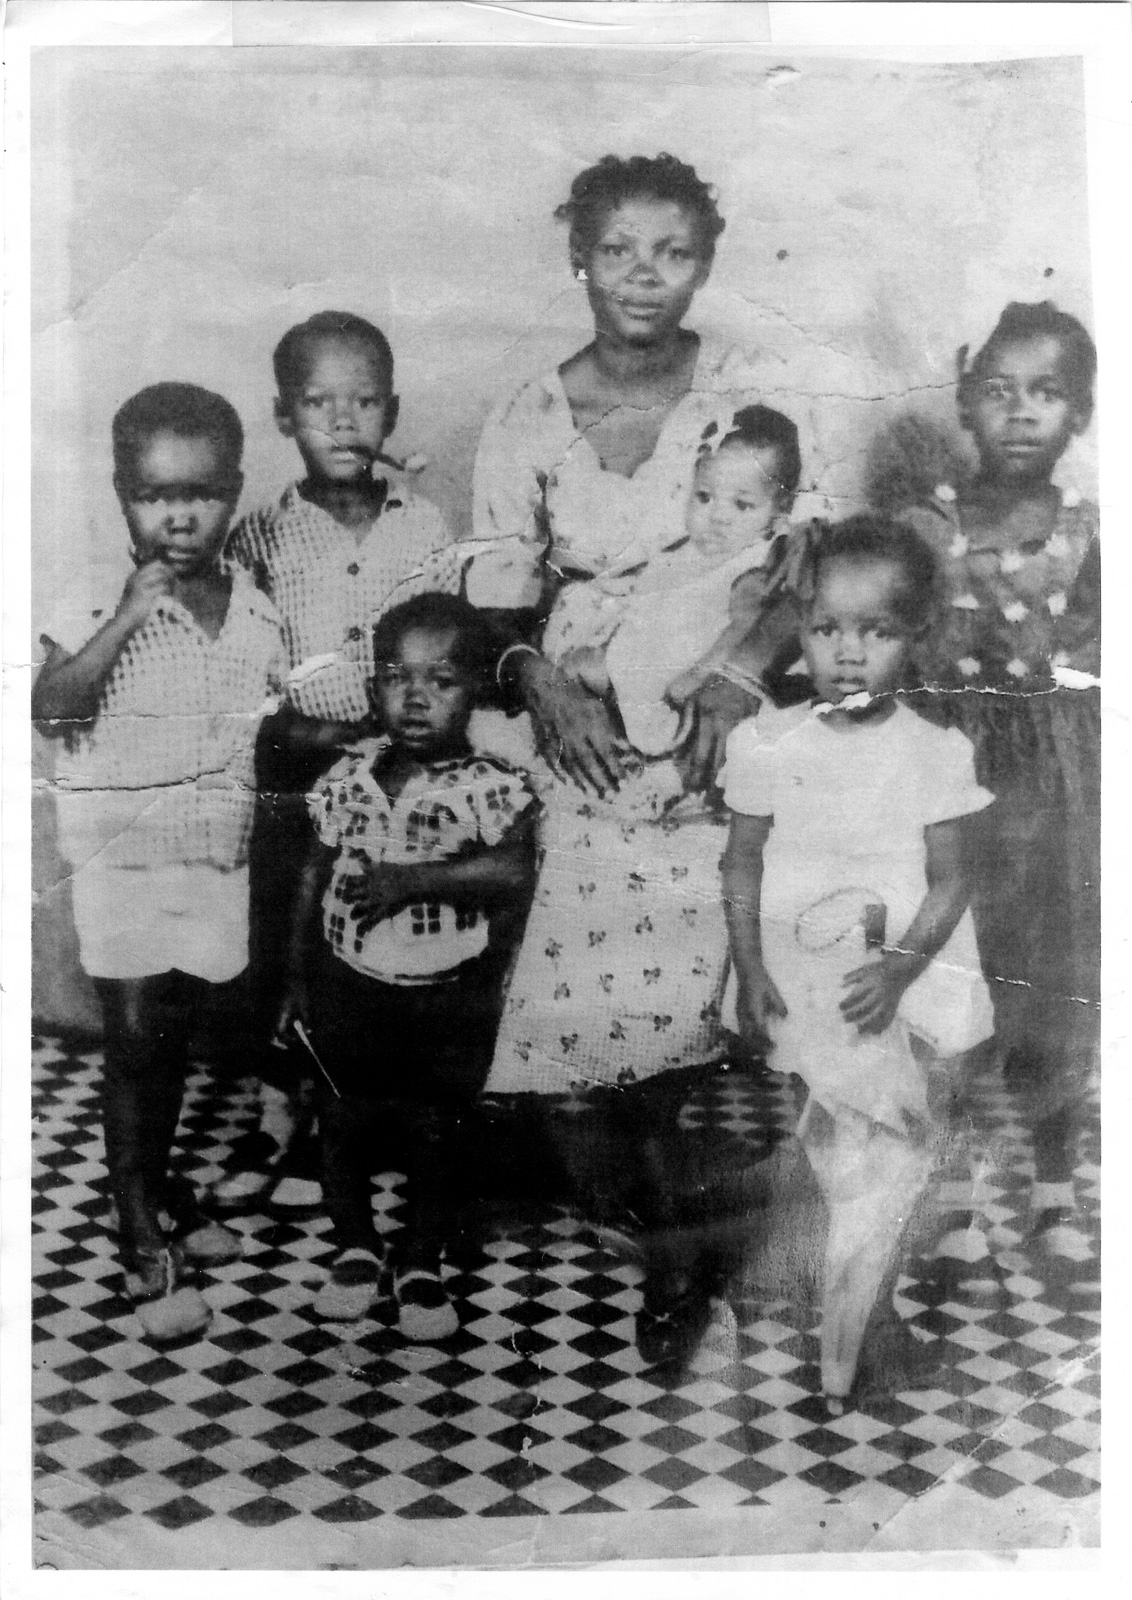 Alexander with his mother and siblings